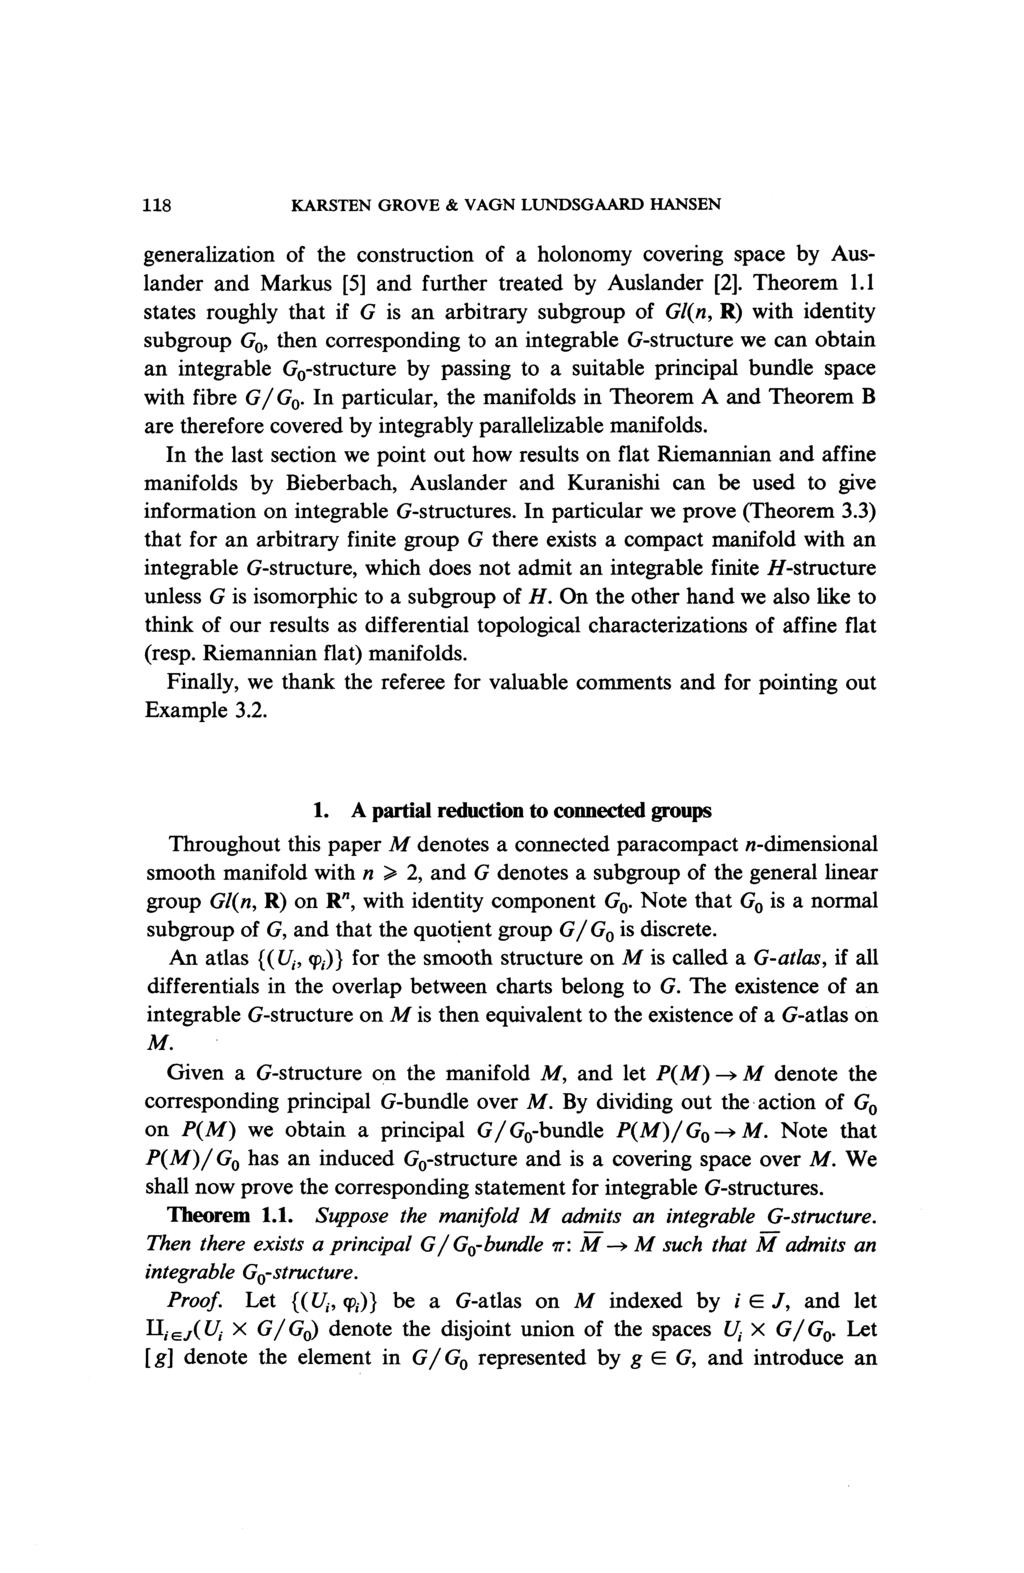 118 KARSTEN GROVE & VAGN LUNDSGAARD HANSEN generalization of the construction of a holonomy covering space by Auslander and Markus [5] and further treated by Auslander [2]. Theorem 1.